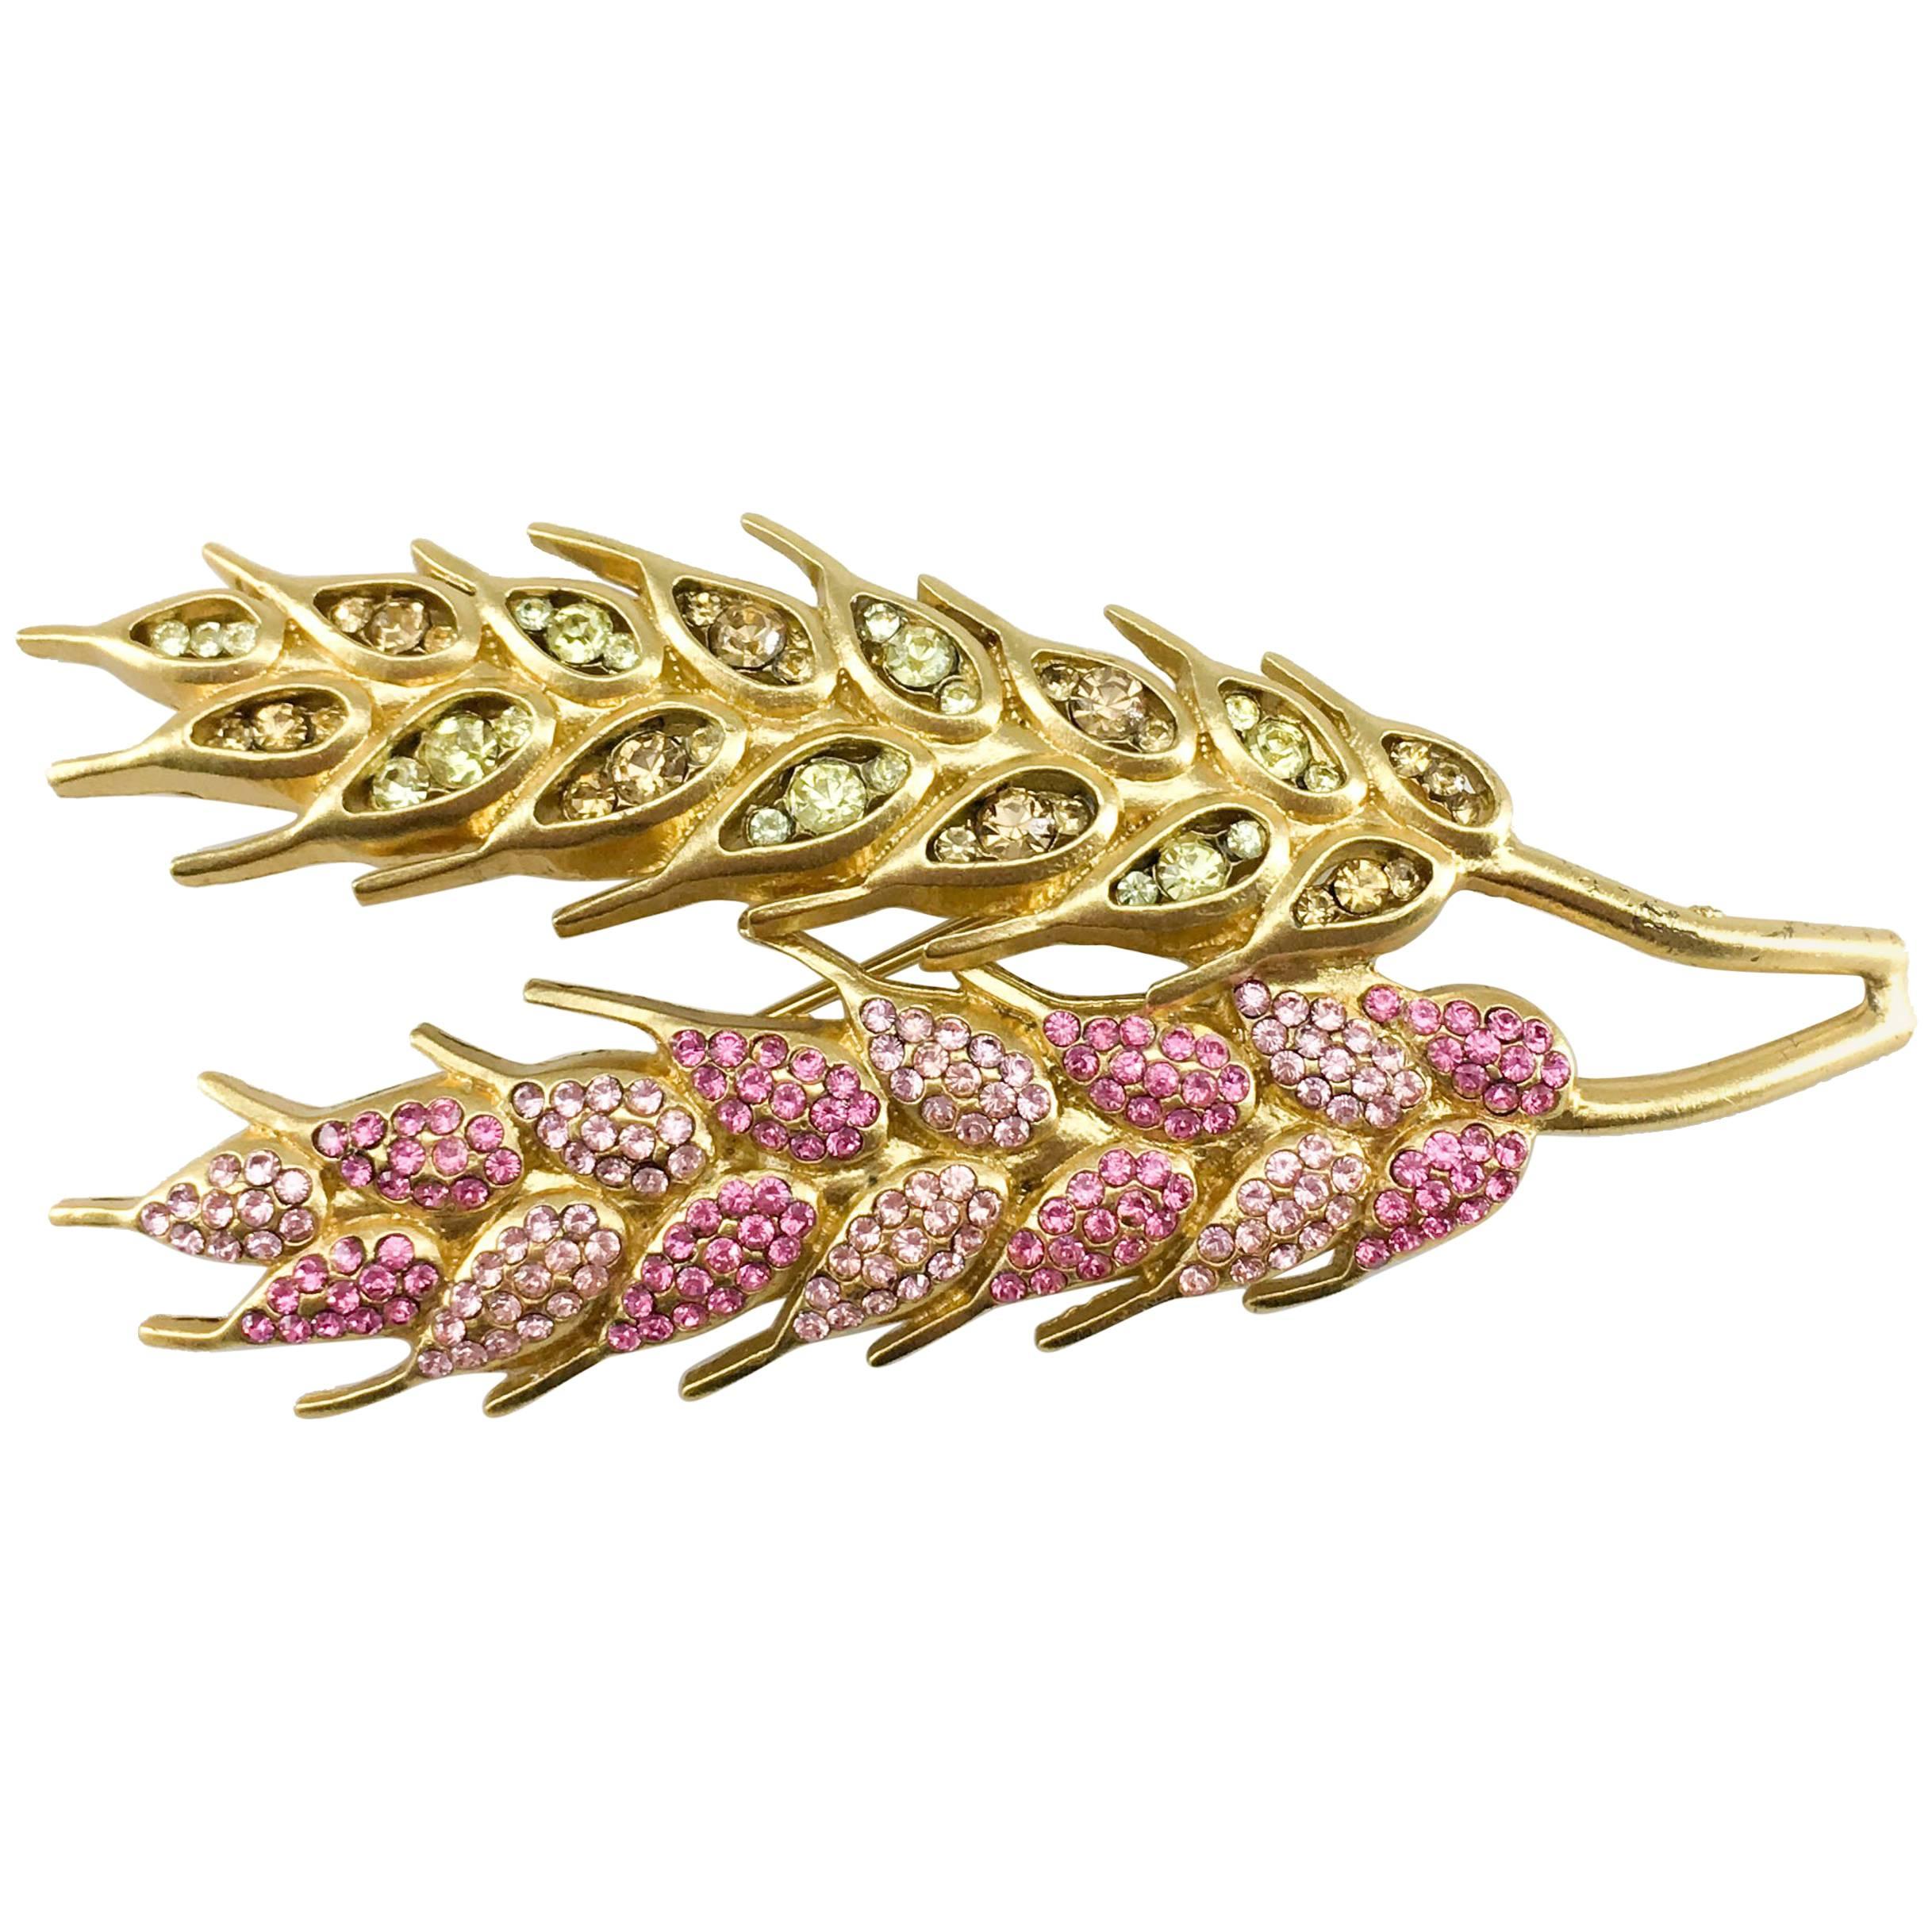  Chanel Pink And Yellow Gold-Plated Wheat Sheaf Brooch, 2003